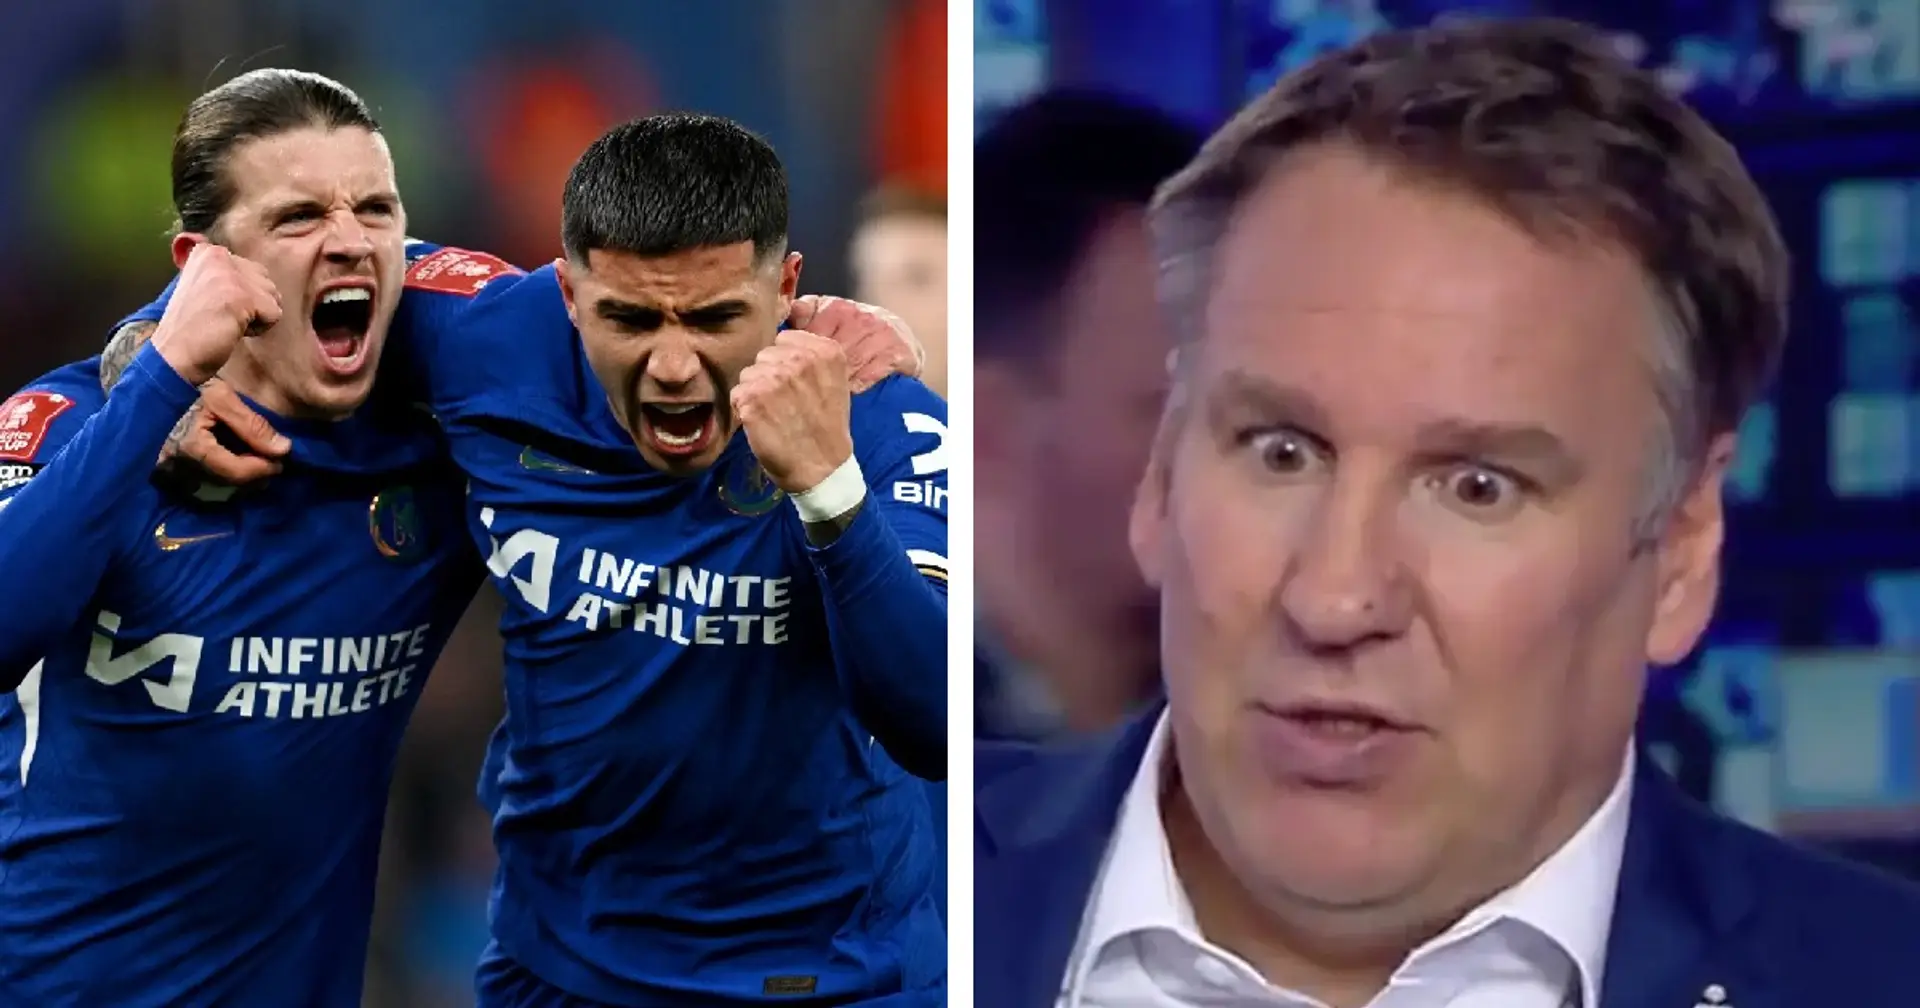 'That's why I don't gamble': Paul Merson eats his words after predicting 'Chelsea have no chance' against Villa